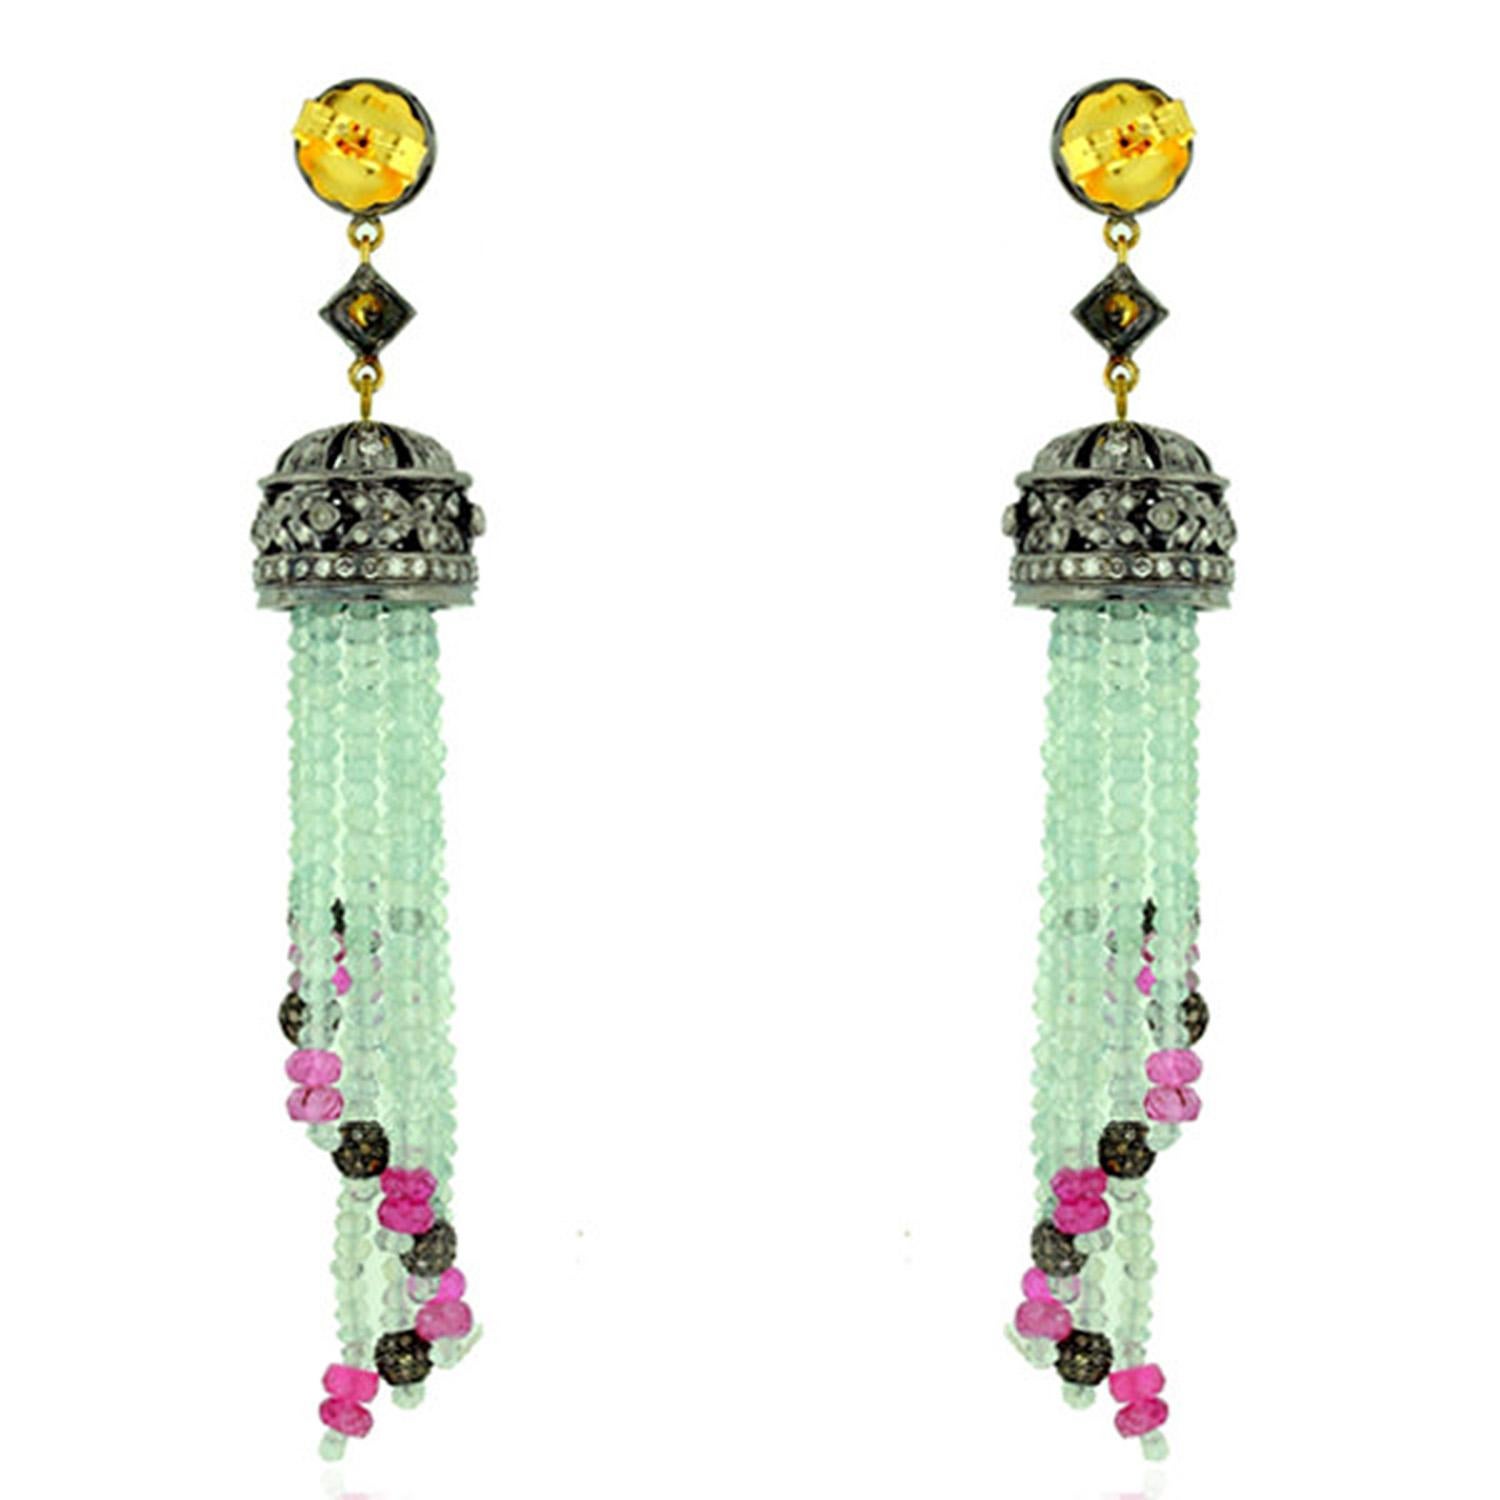 These stunning exceptional tassel earrings is handmade in 18-karat gold & sterling silver.  It is set with 38.45 carats aquamarine, 9.4 carat tourmaline and 4.92 carats of diamonds. 

FOLLOW  MEGHNA JEWELS storefront to view the latest collection &